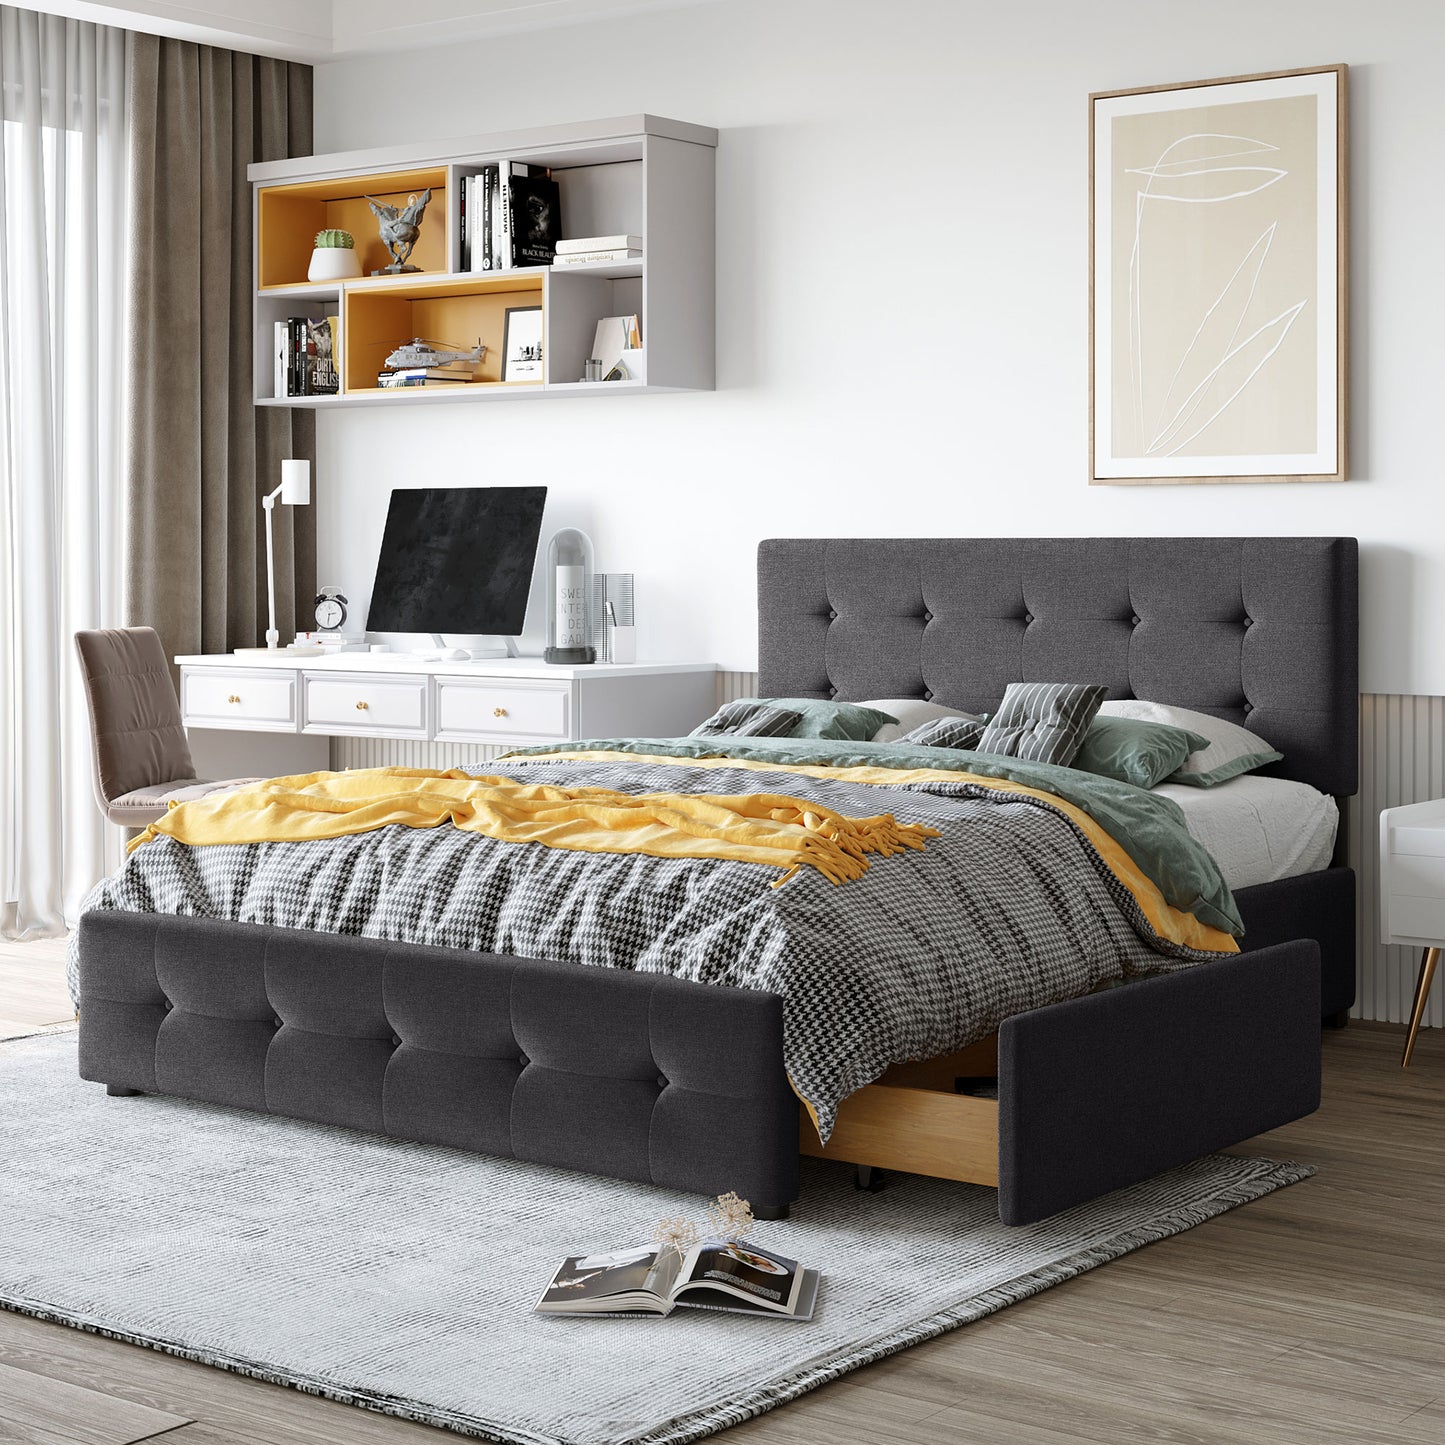 Queen-size Dark Gray Upholstered Platform Bed with Four Storage Drawers